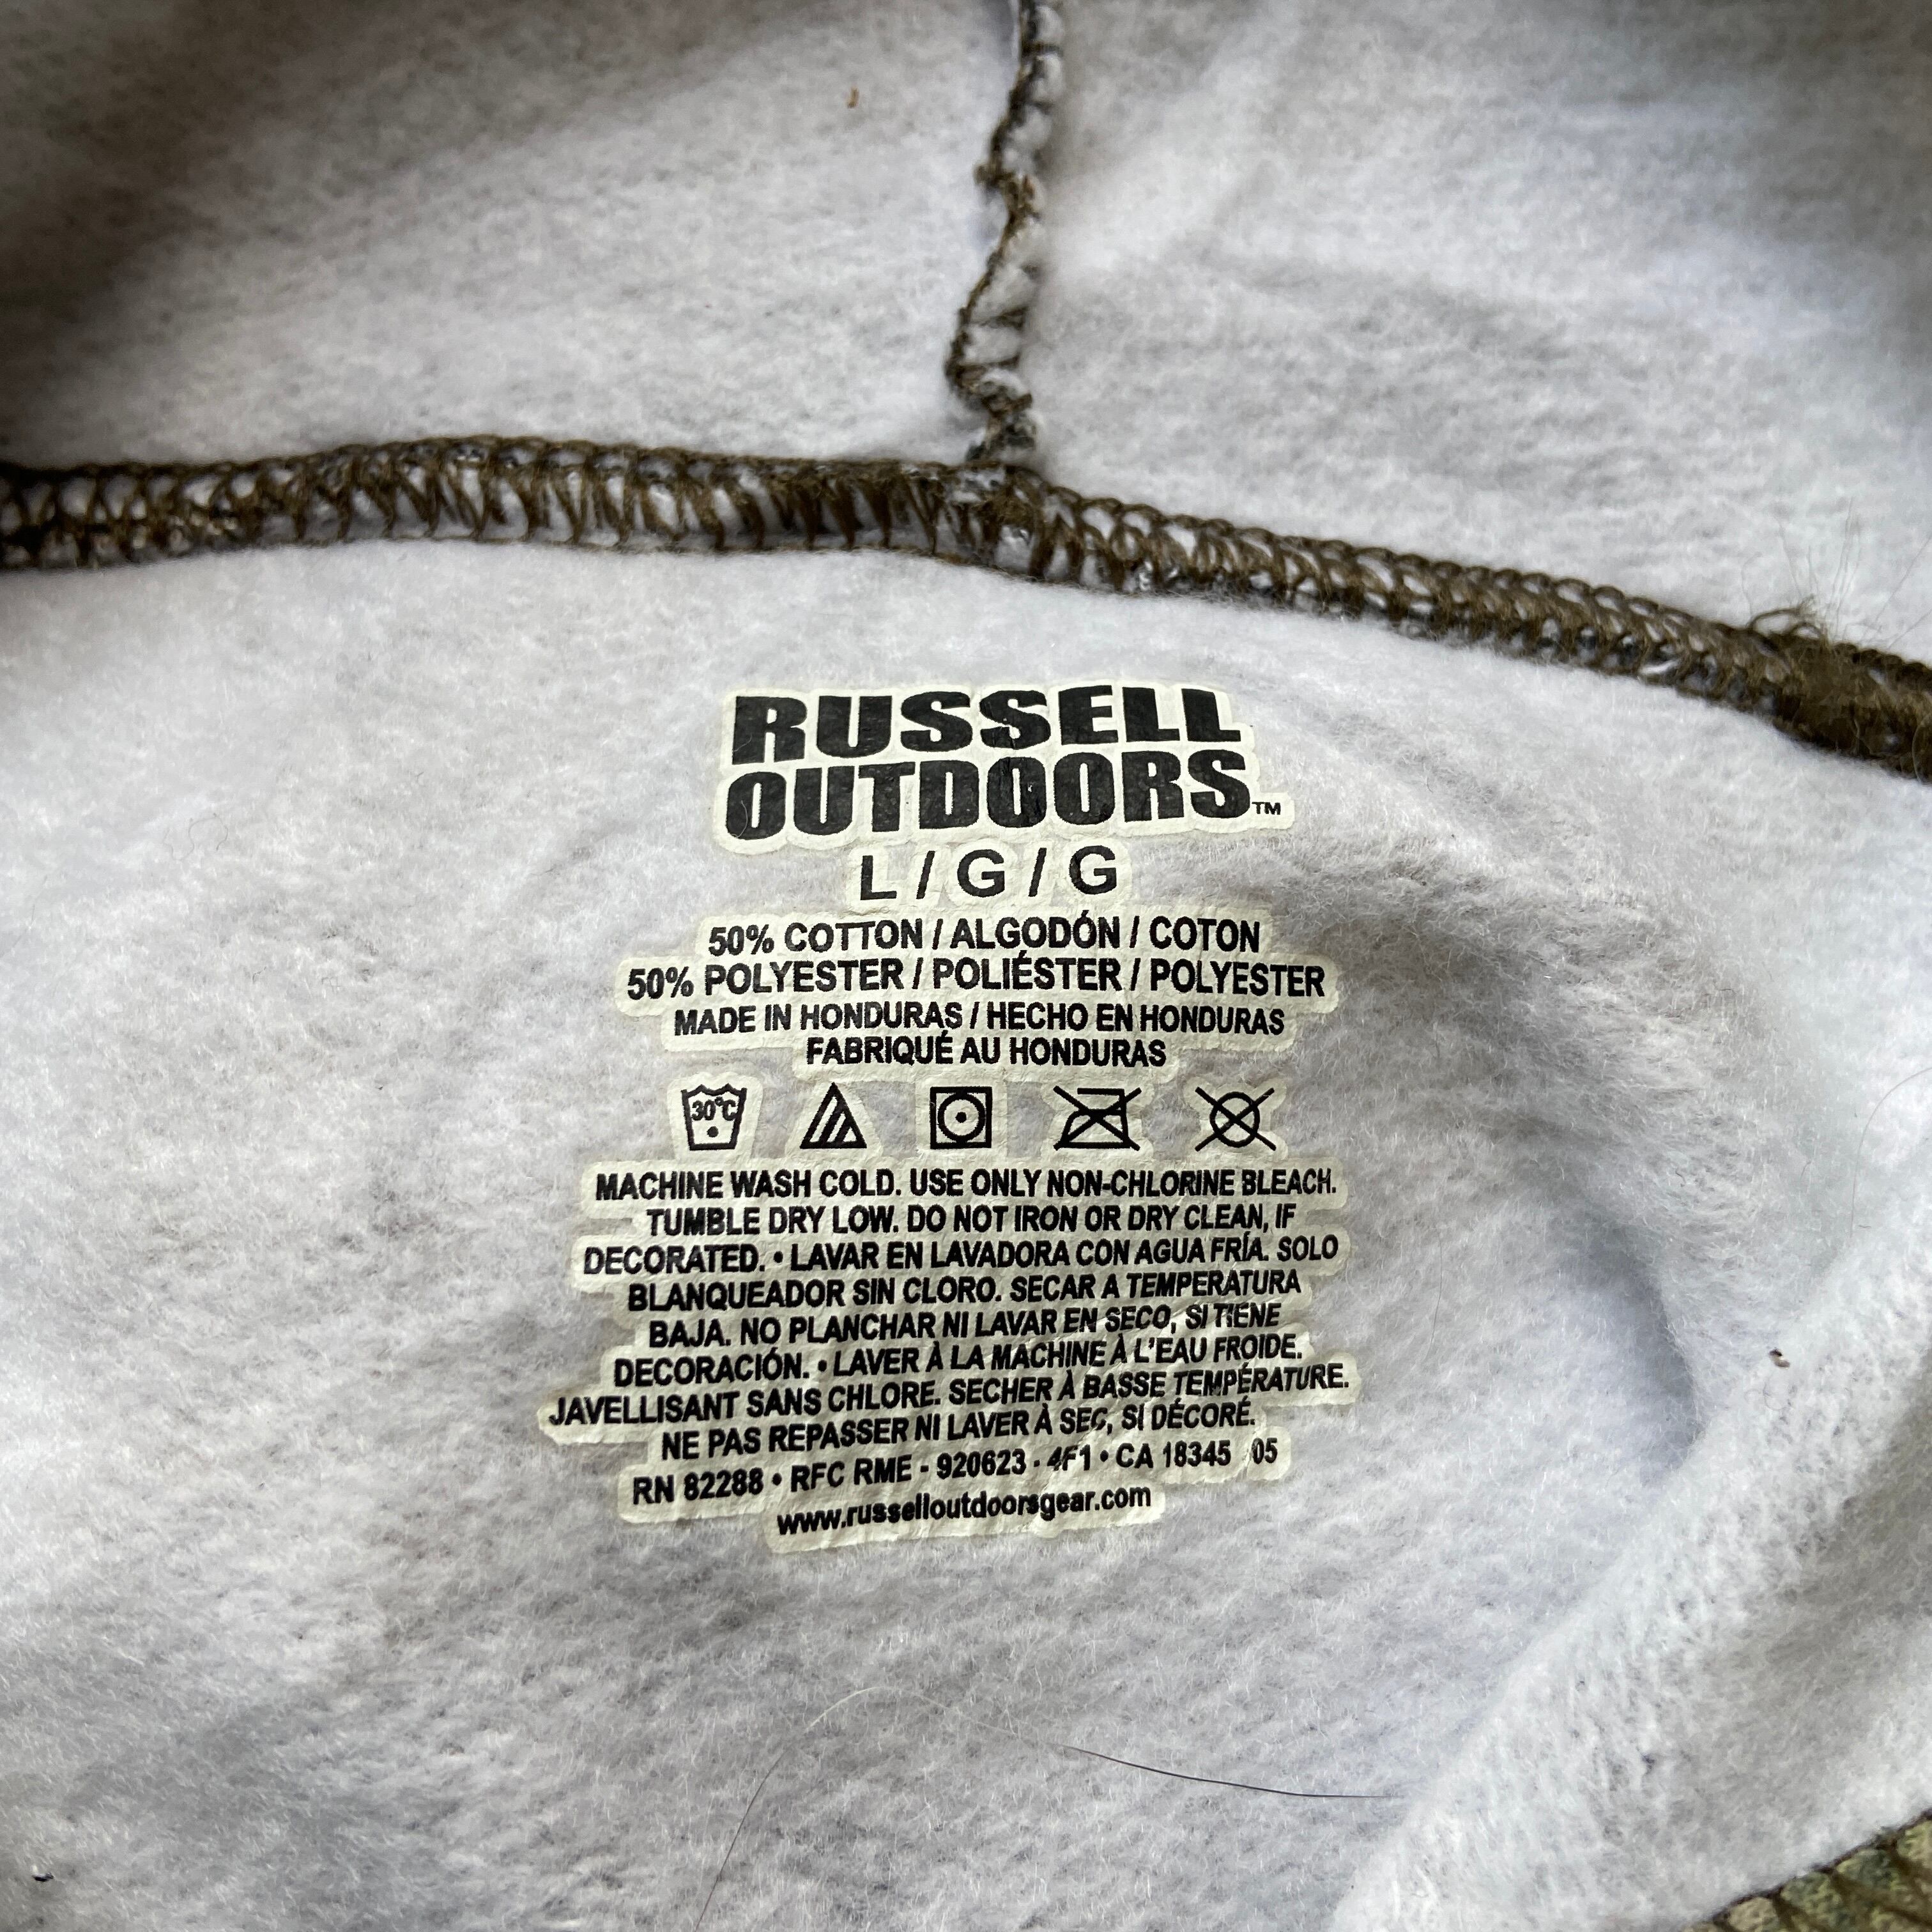 RUSSELL OUTDOORS リアルツリーカモ 総柄 スウェットパーカー メンズL ...